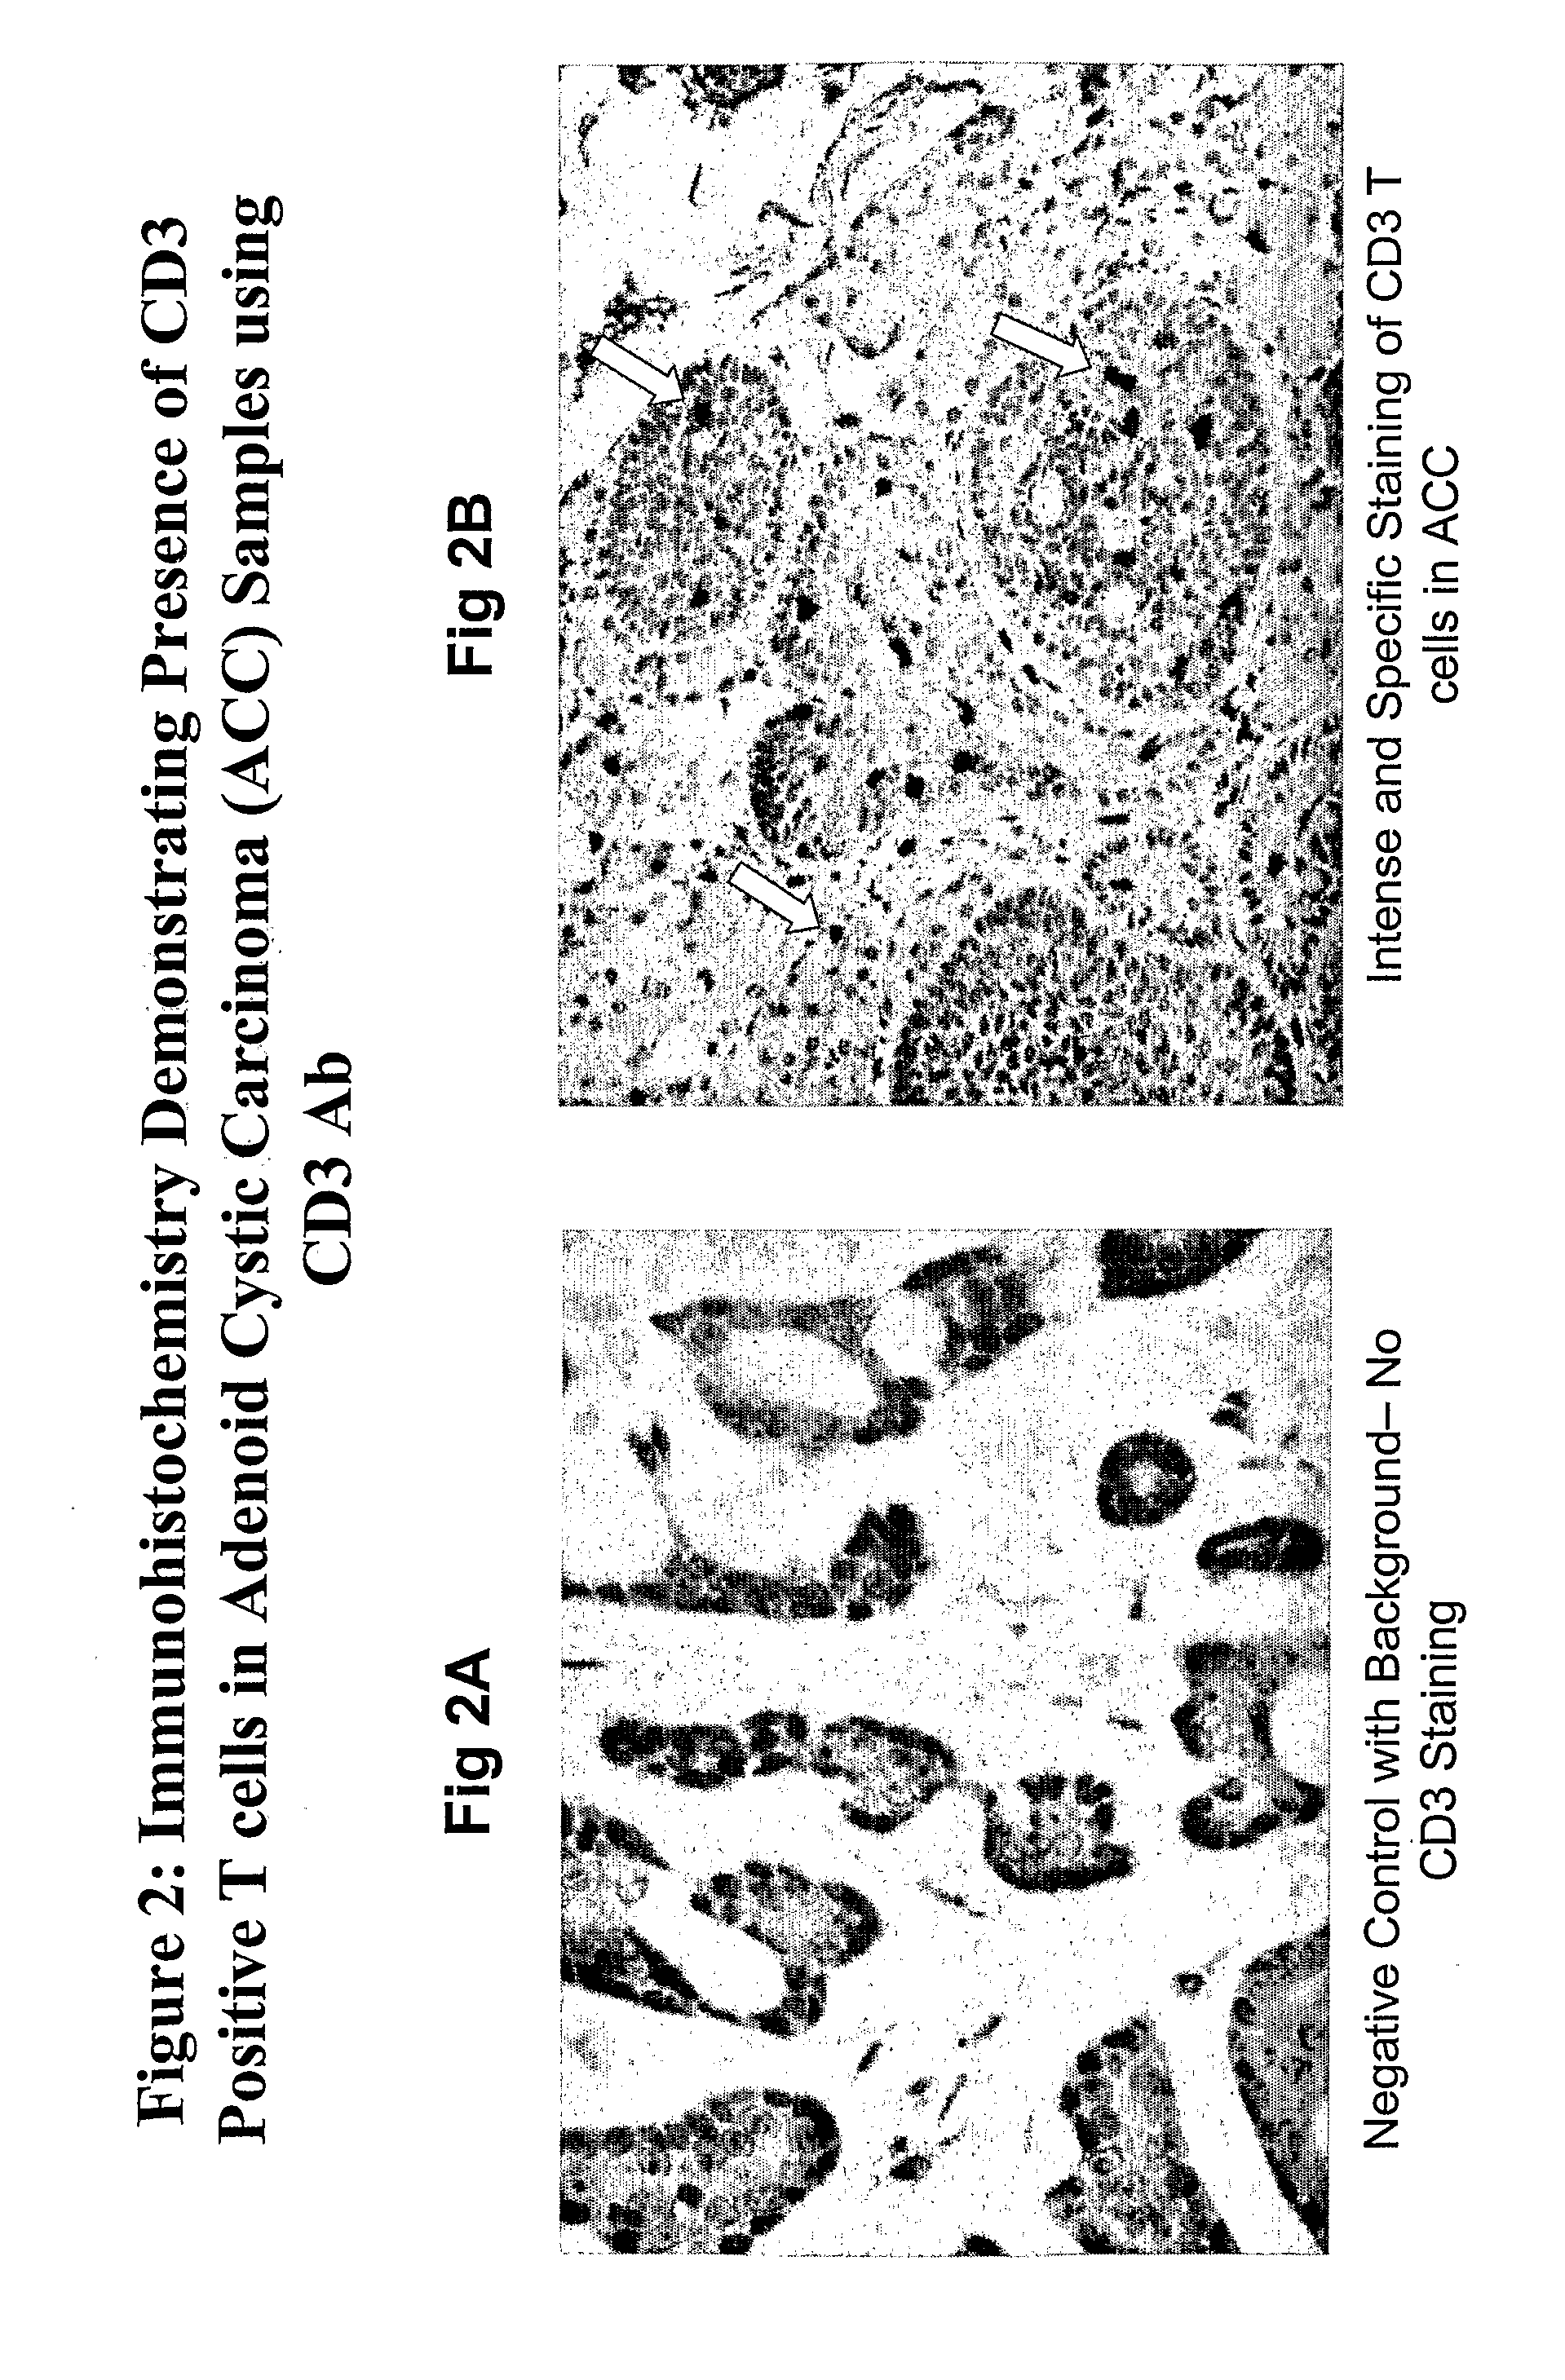 Ovr 110 Antibody Compositions and Methods of Use